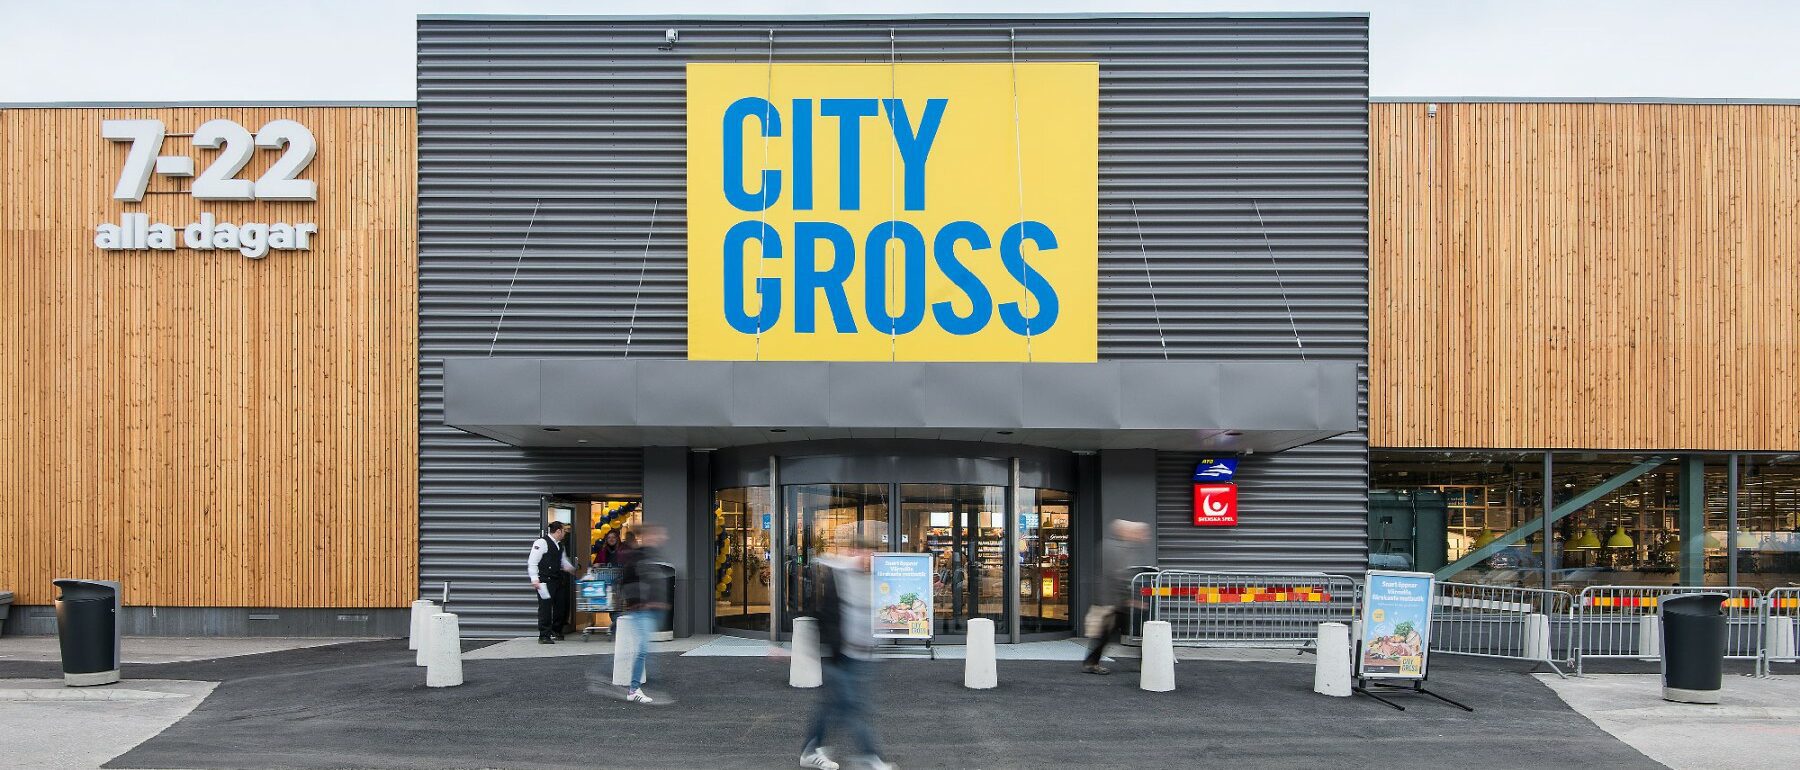 Photograph of CITY GROSS store